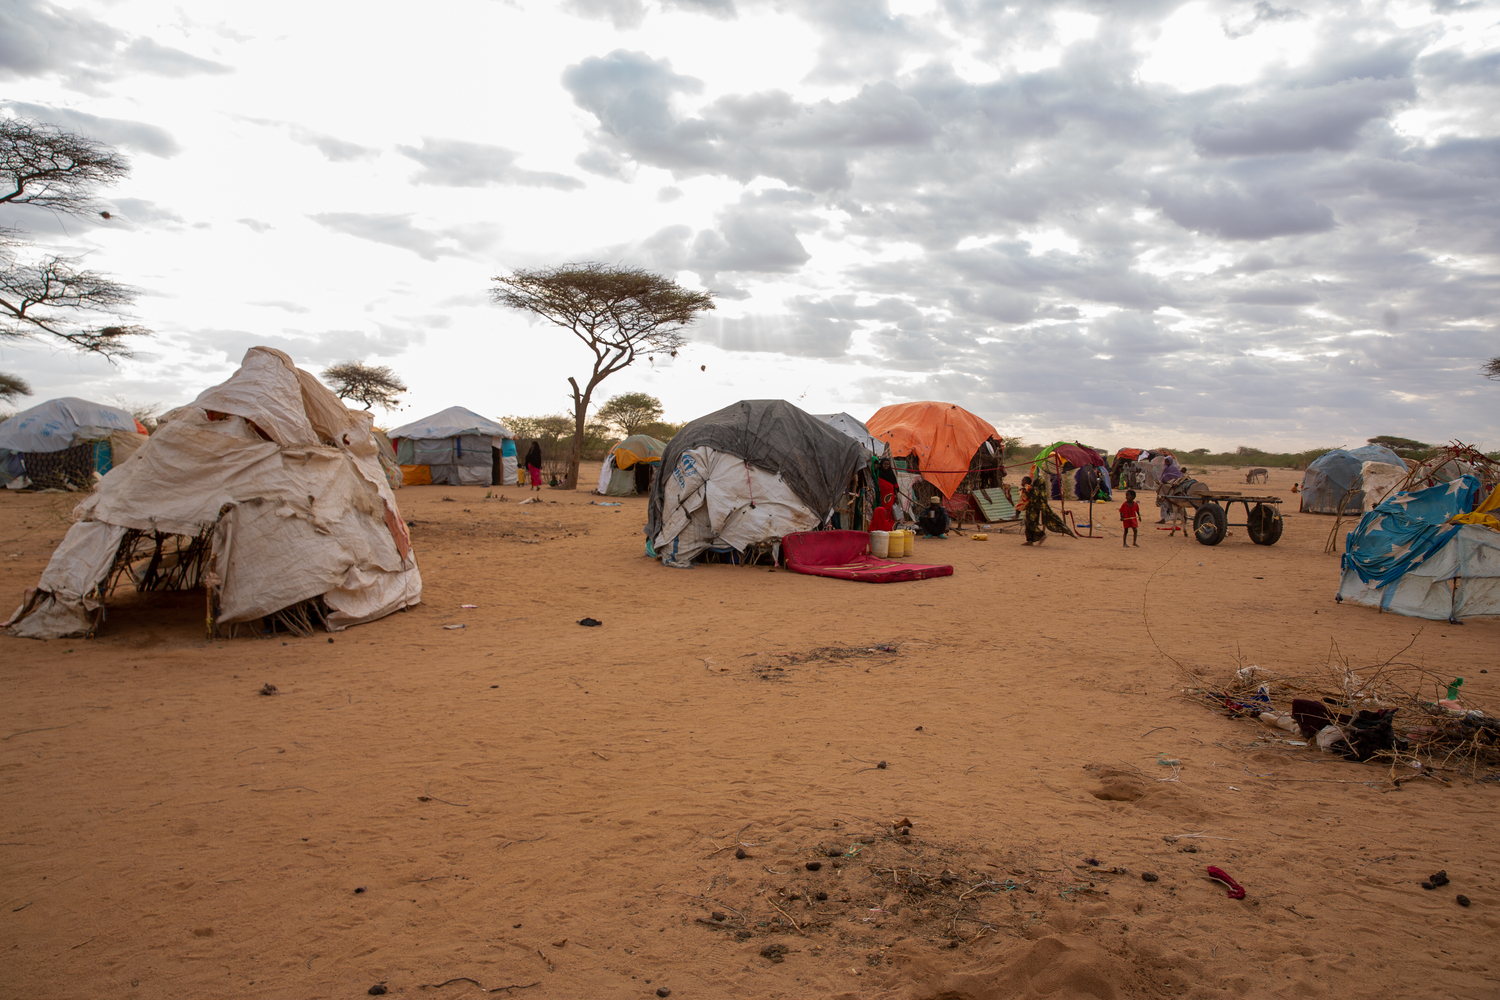 Makeshift shelters in an arid landscape.